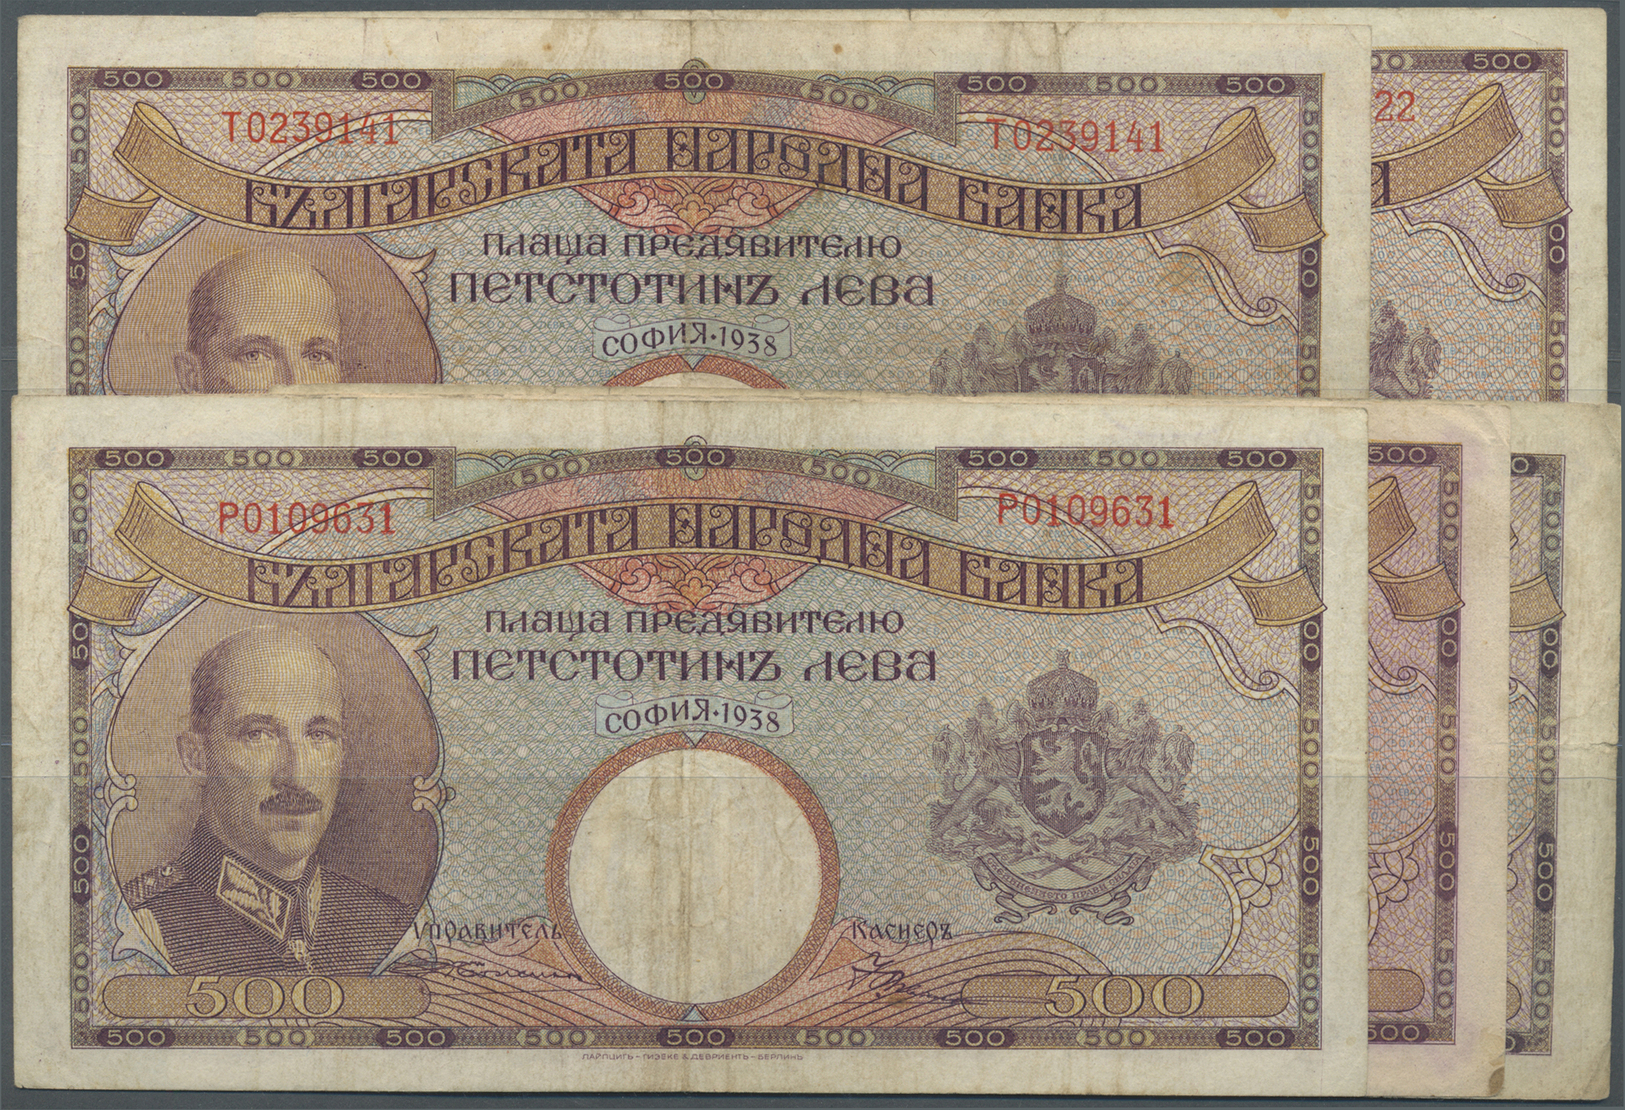 00409 Bulgaria / Bulgarien: Set With 5 Banknotes 500 Leva 1938, P.55, All In Used Condition With Several Folds, Stained - Bulgaria